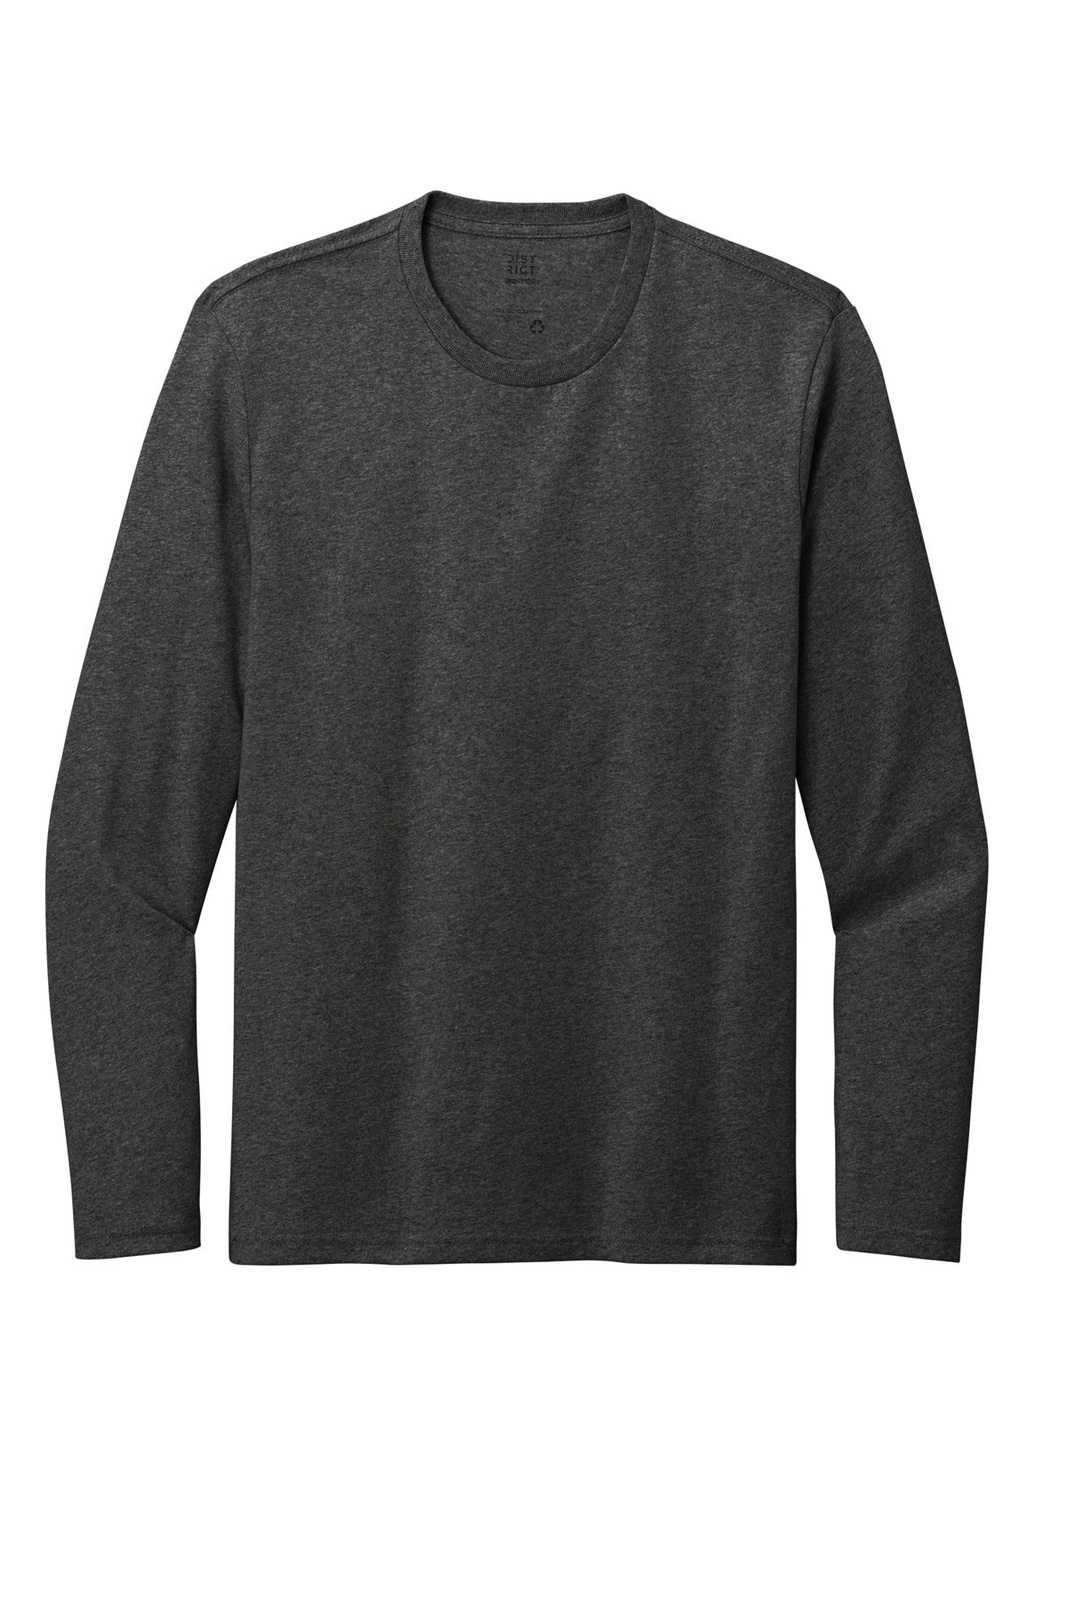 District DT8003 Re-Tee Long Sleeve - Charcoal Heather - HIT a Double - 2